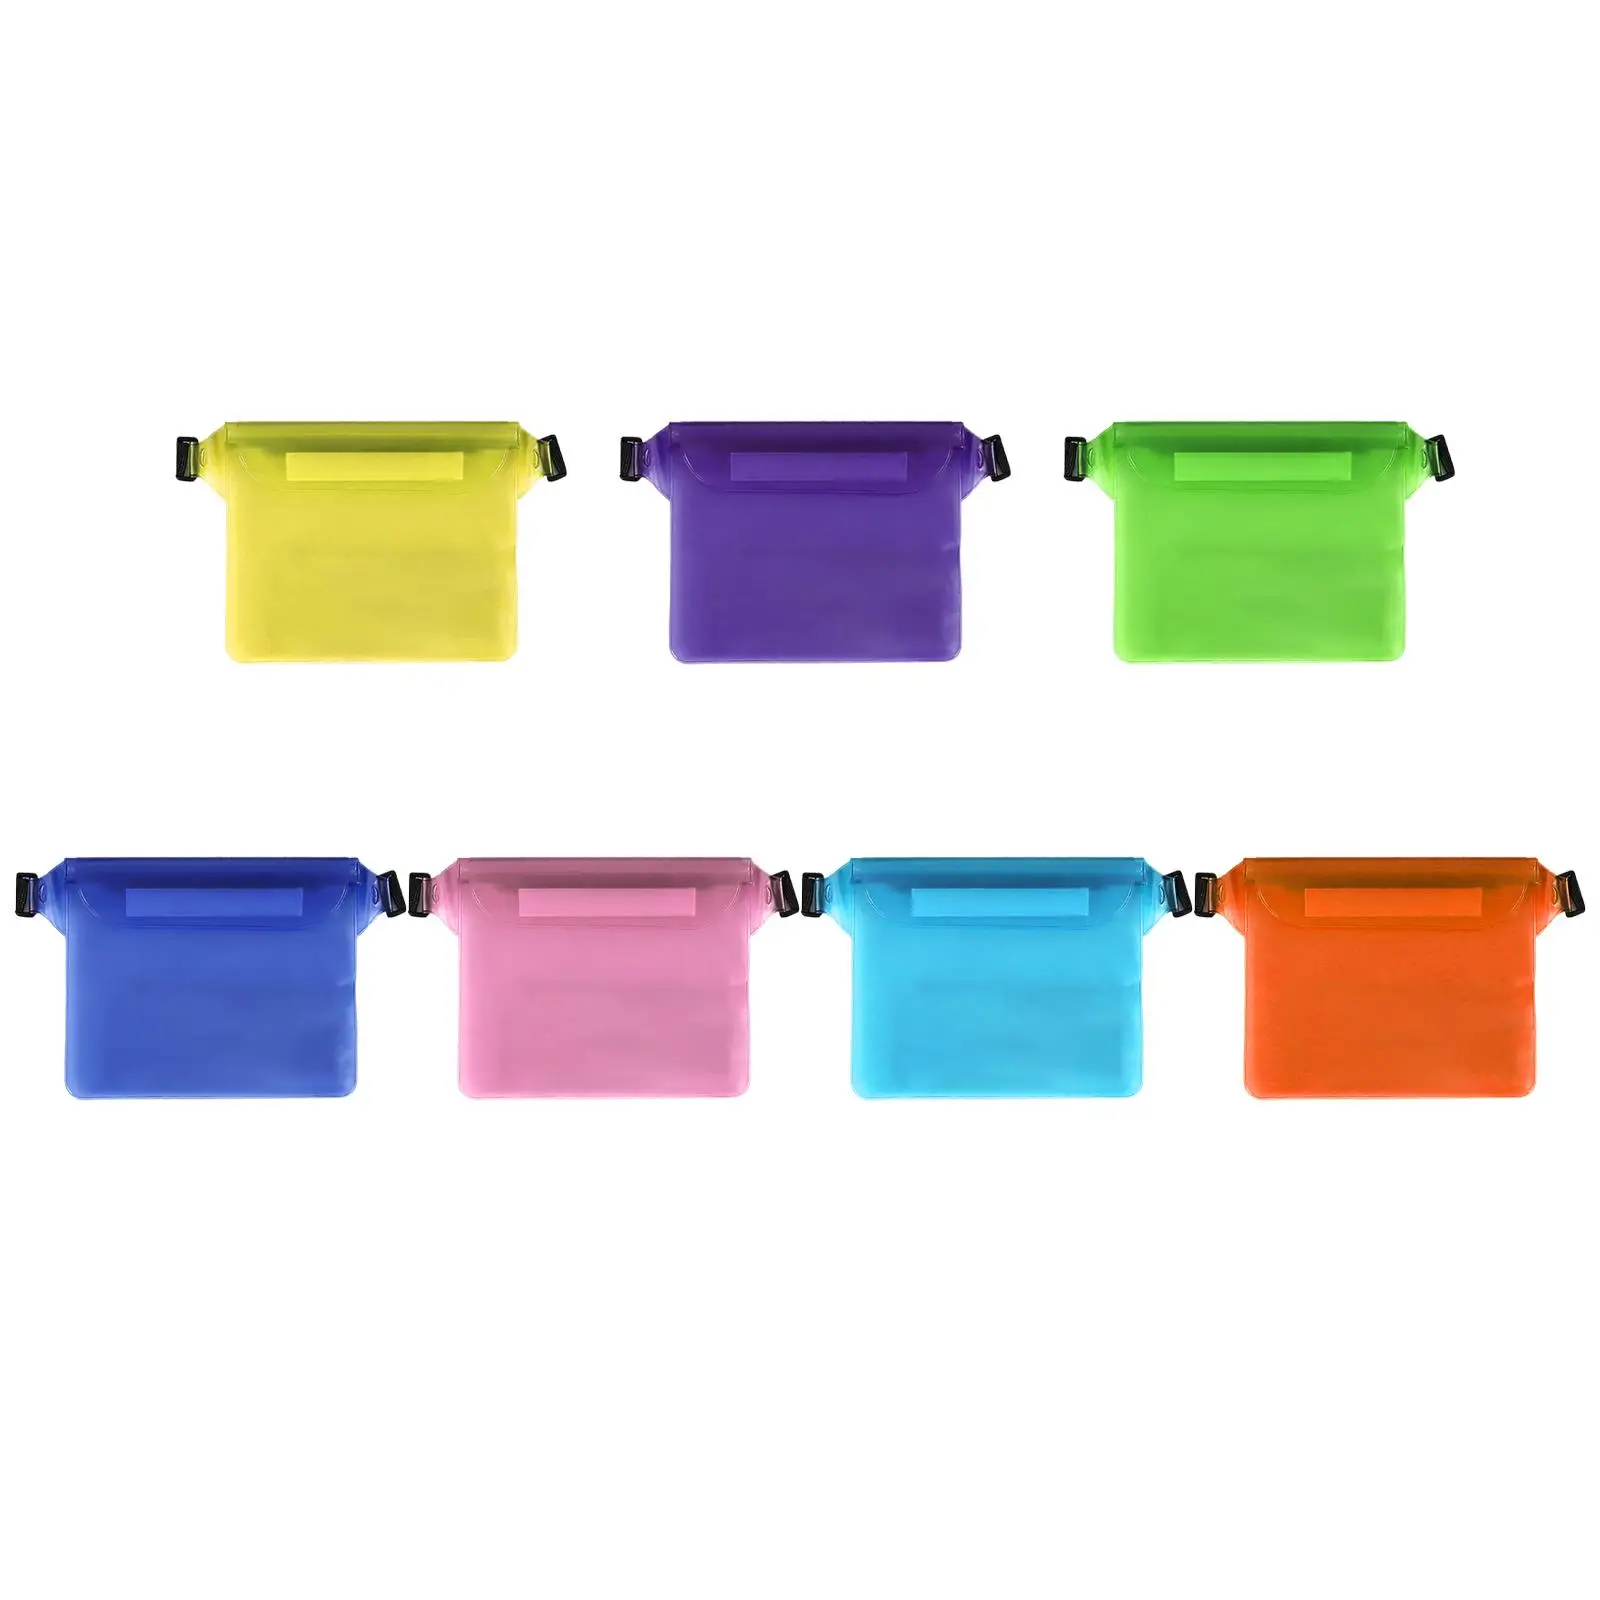 Waterproof Storage Bag Lightweight Waist Pouch Fanny Packs for Snorkeling Kayaking Water Sports Travel Boating